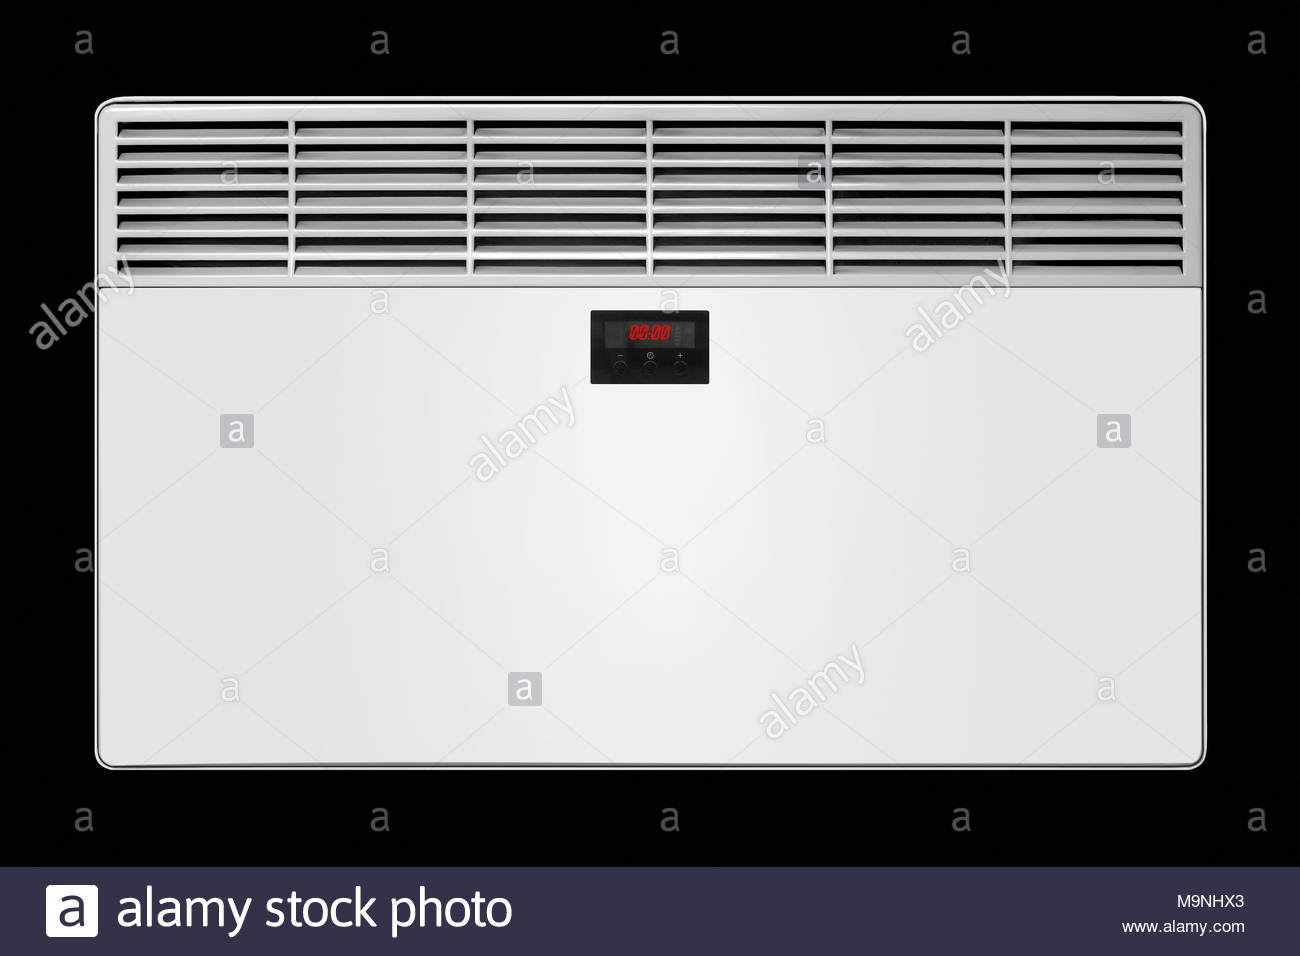 Home Appliance Electric Convection Heater With Display On A